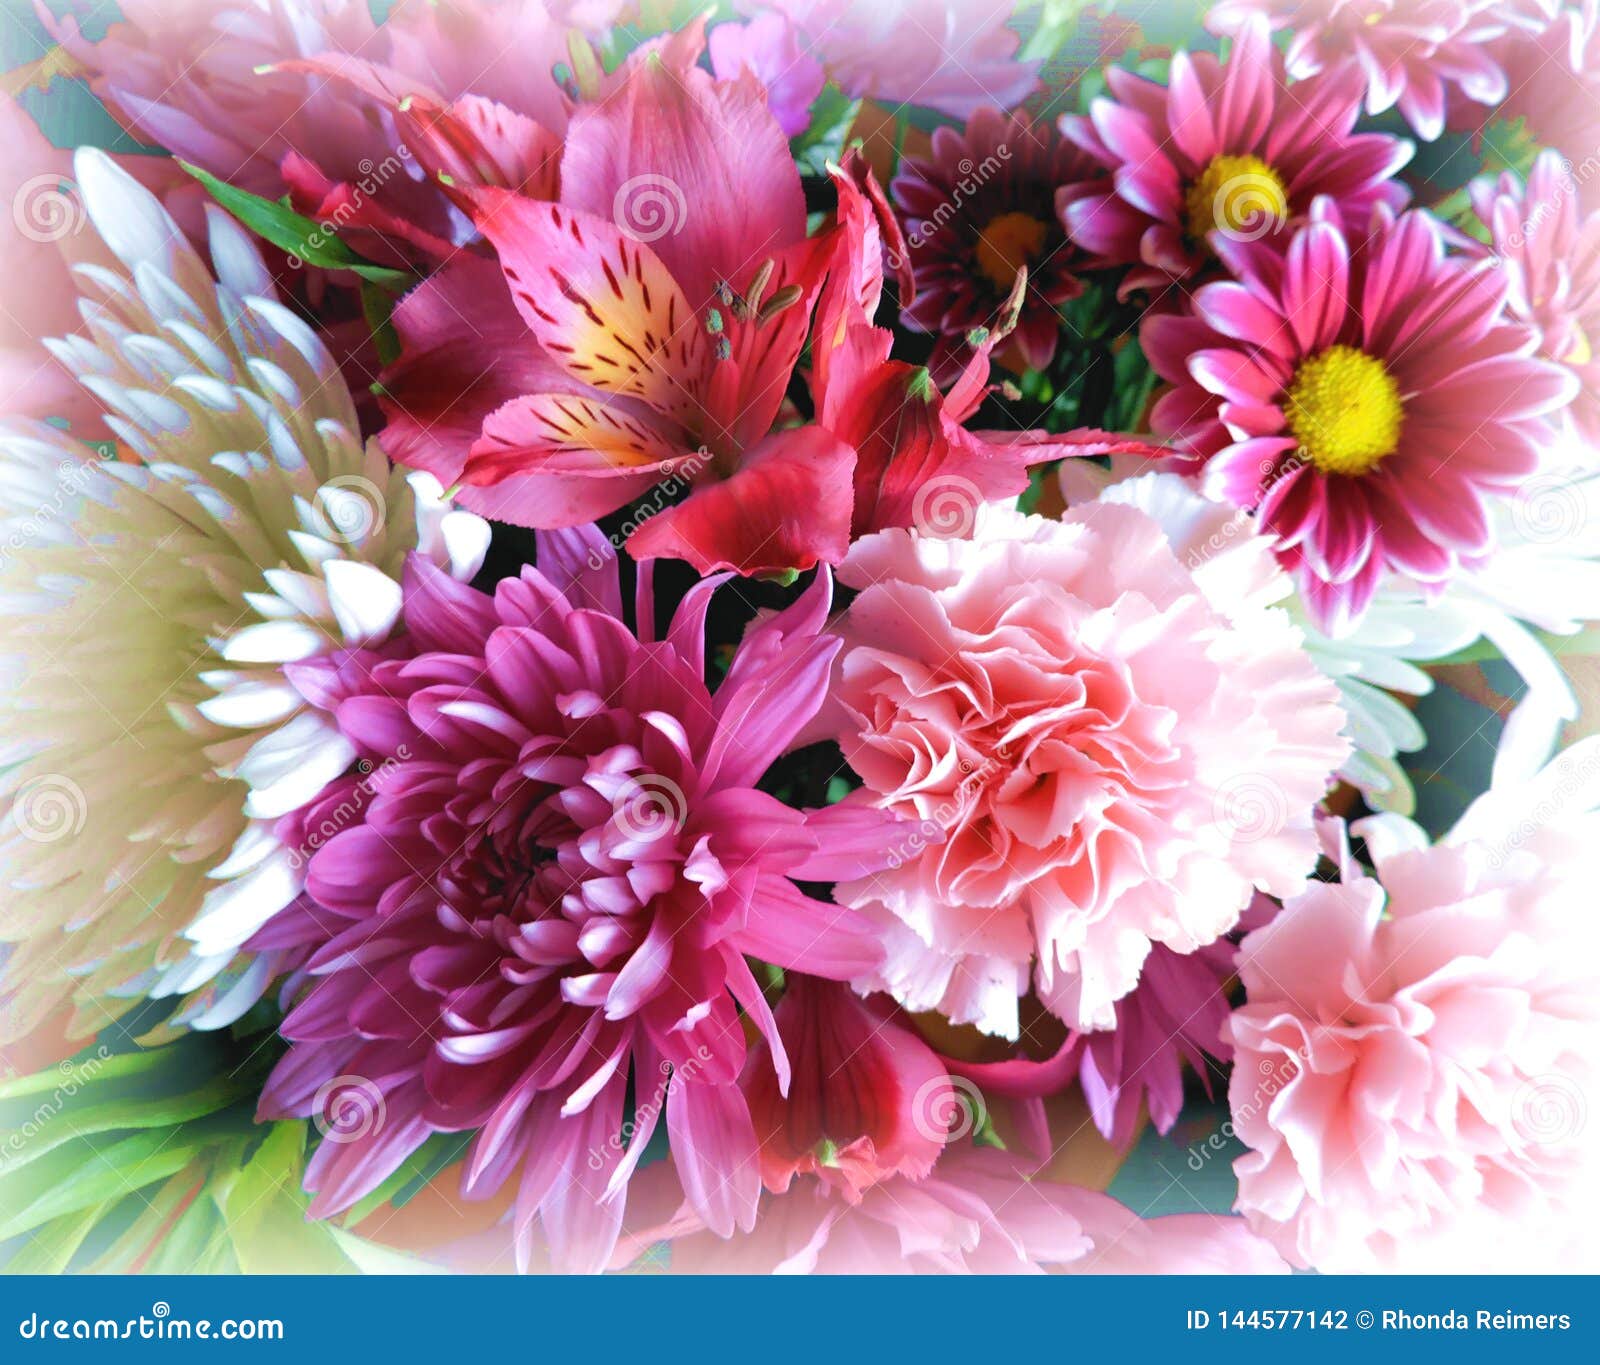 Beautiful Colorful Bouquet of Springtime Flowers with Soft Edge Around ...